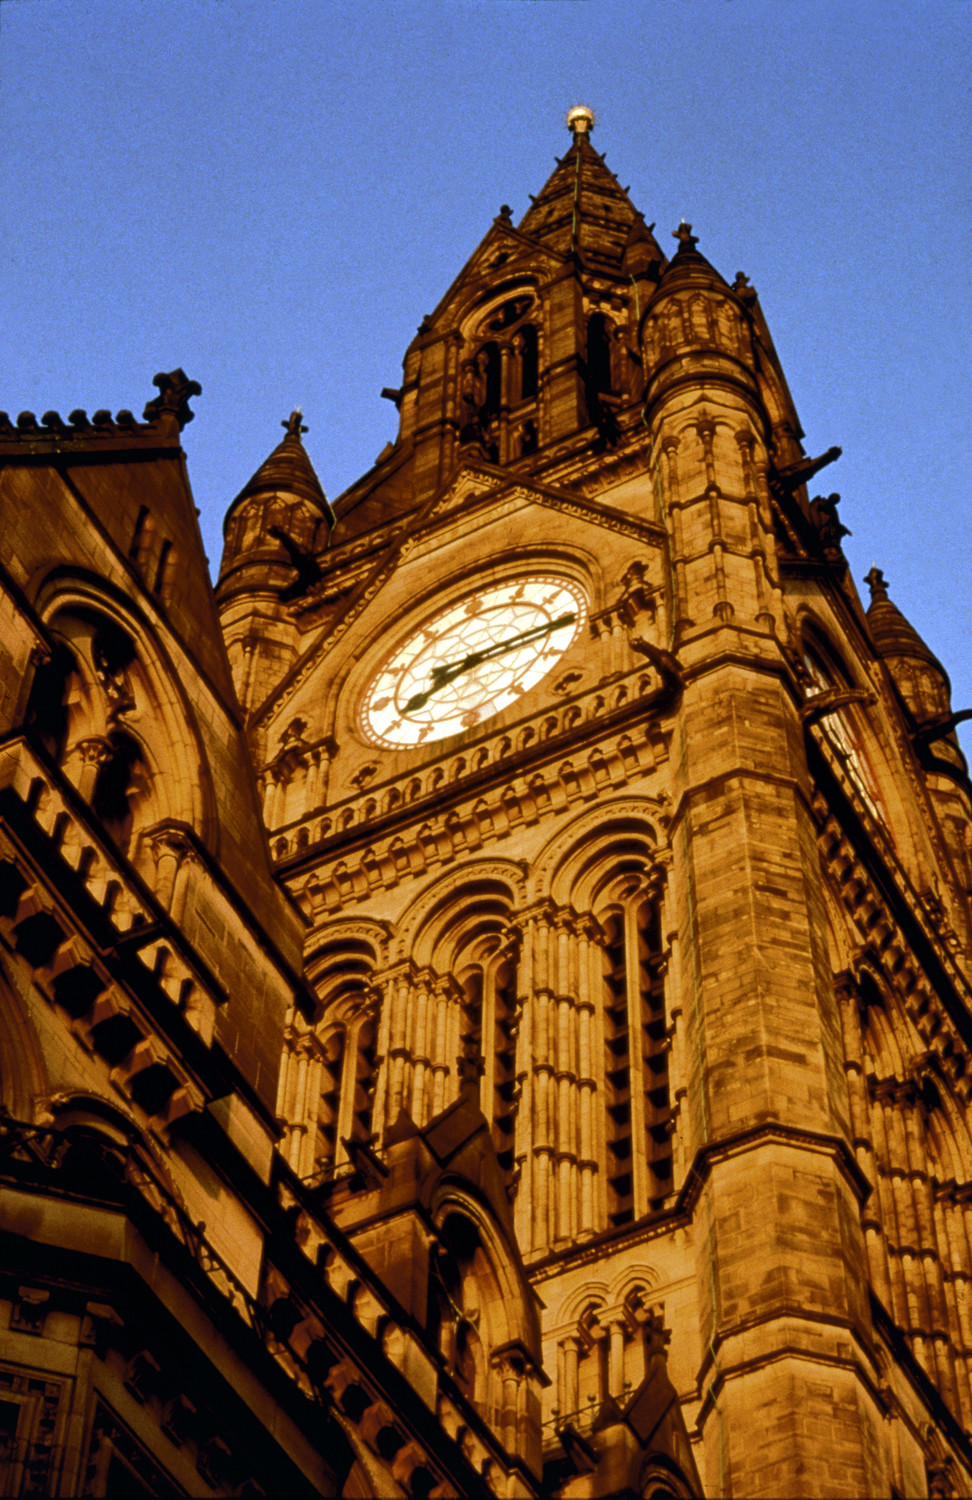 Manchester Town Hall Clock